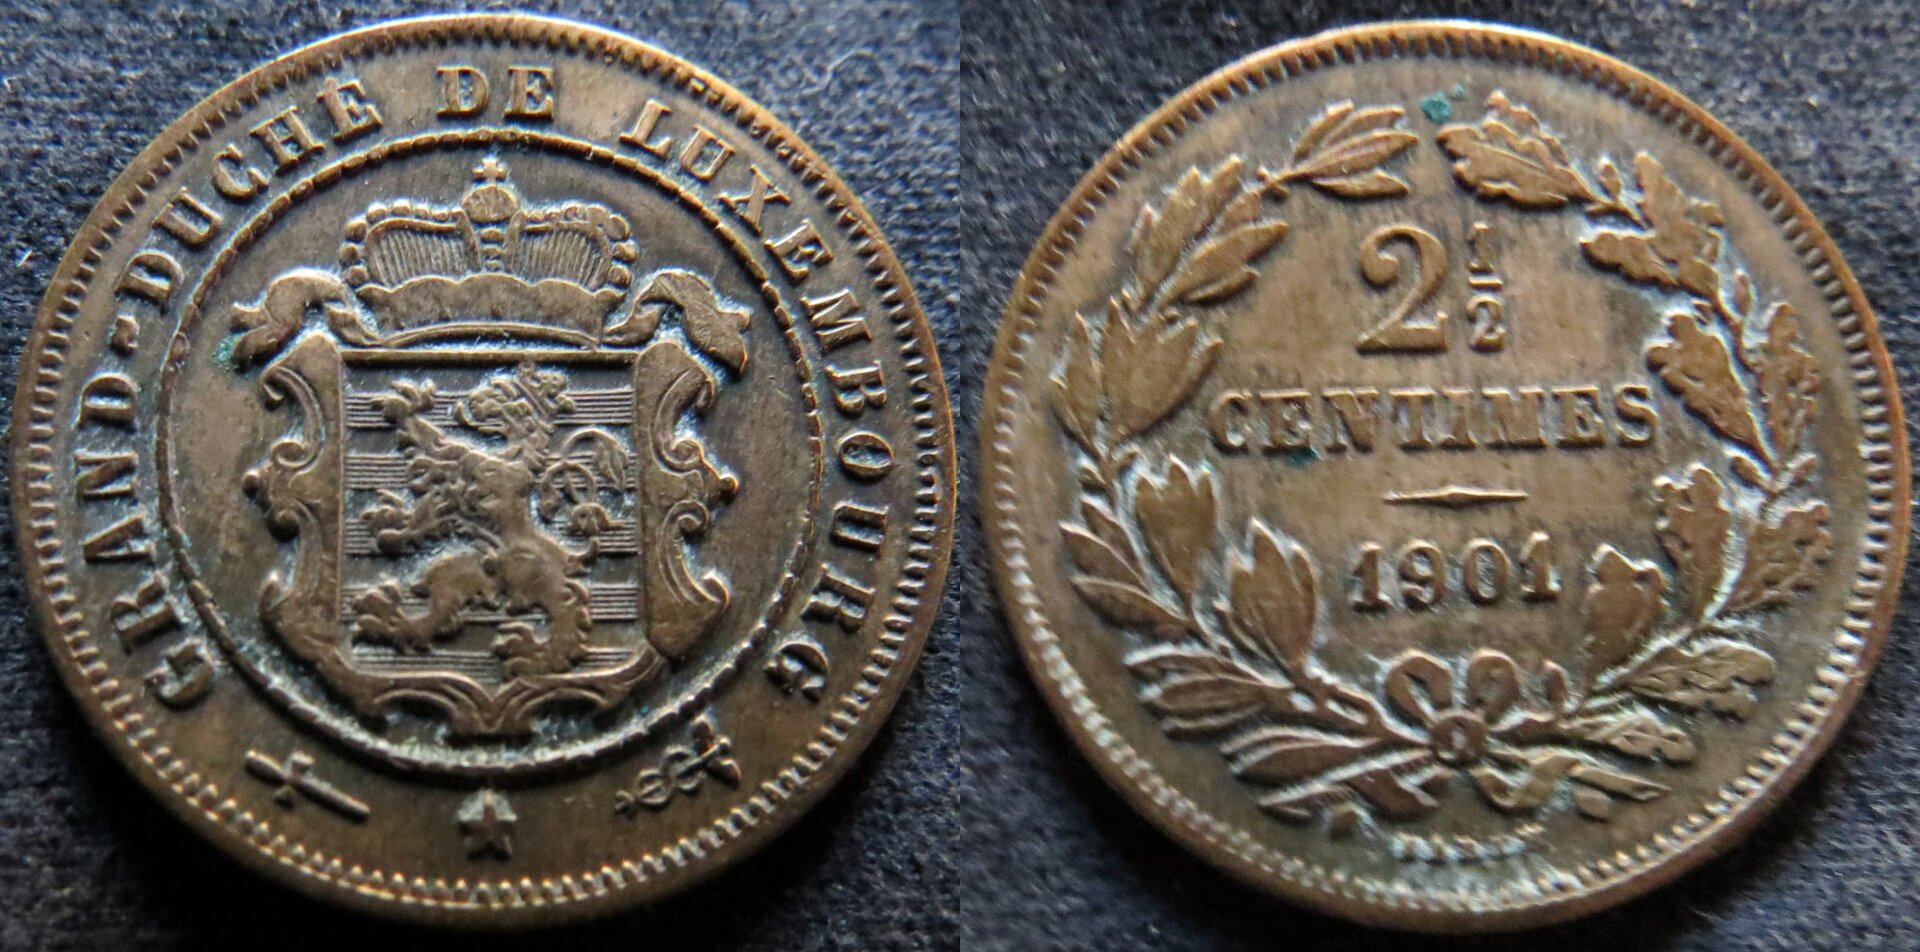 Luxembourg 2 1:2 Centimes 1901.jpg